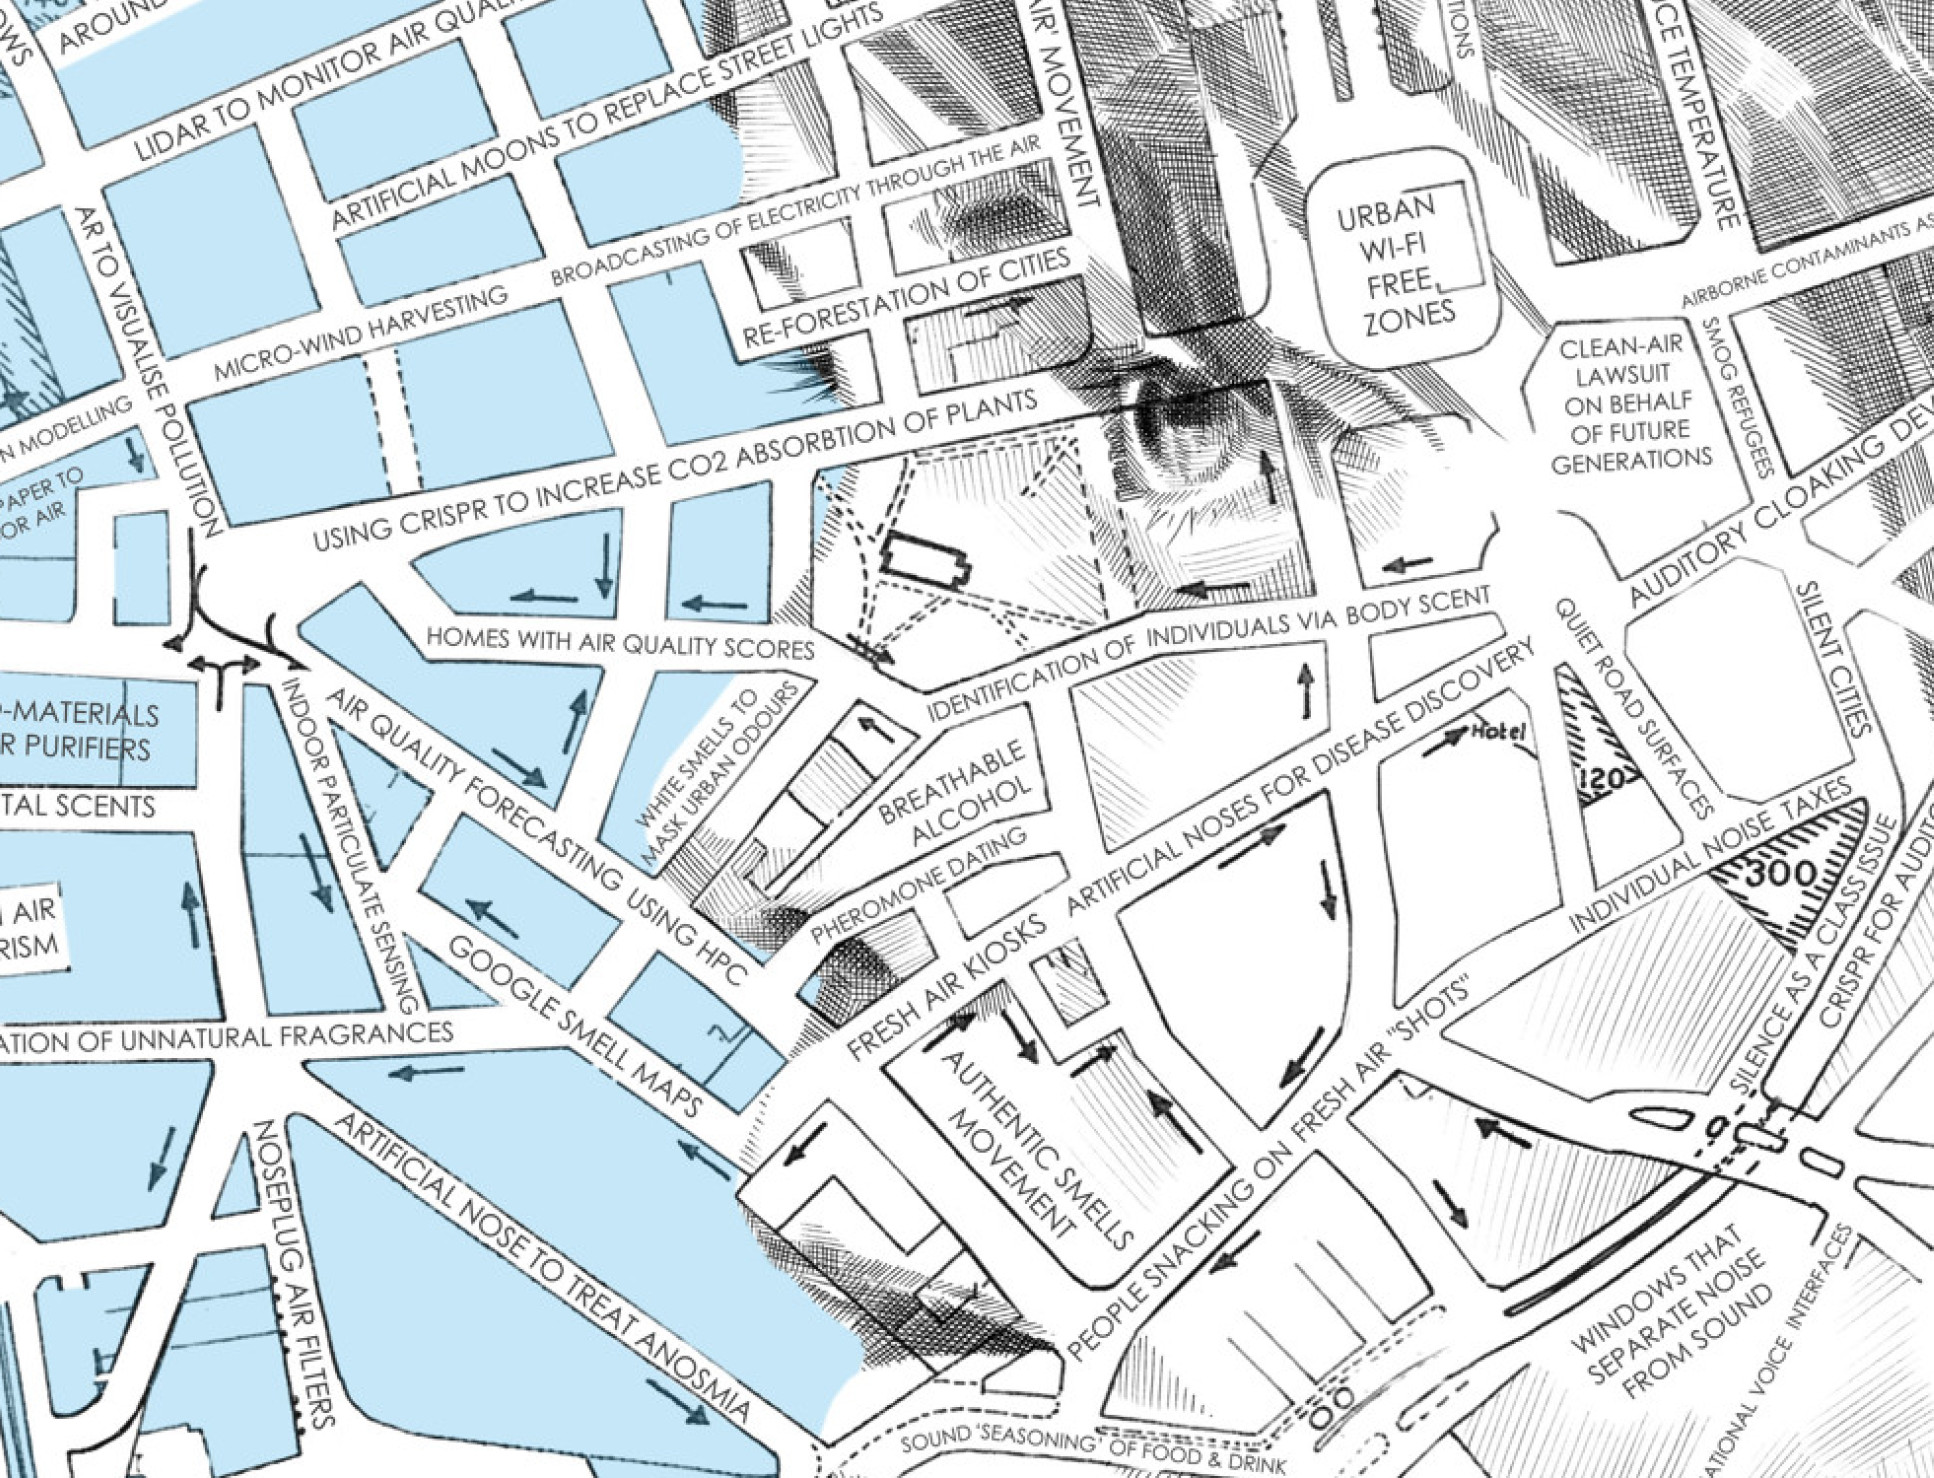 Detail from interactive map showing the future of urban air